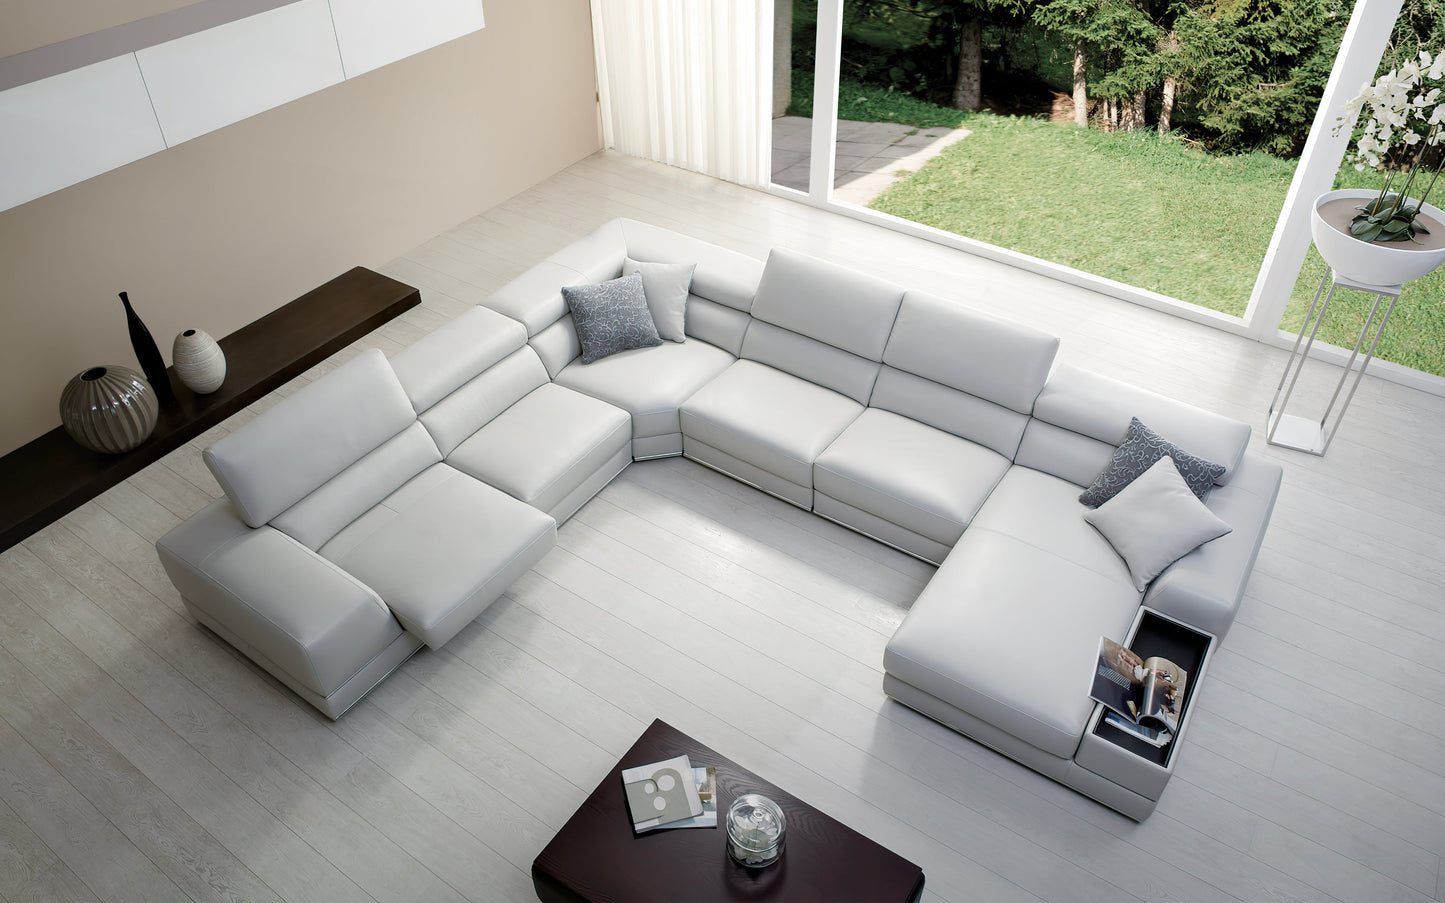 Modular Recliner Sectional Couch